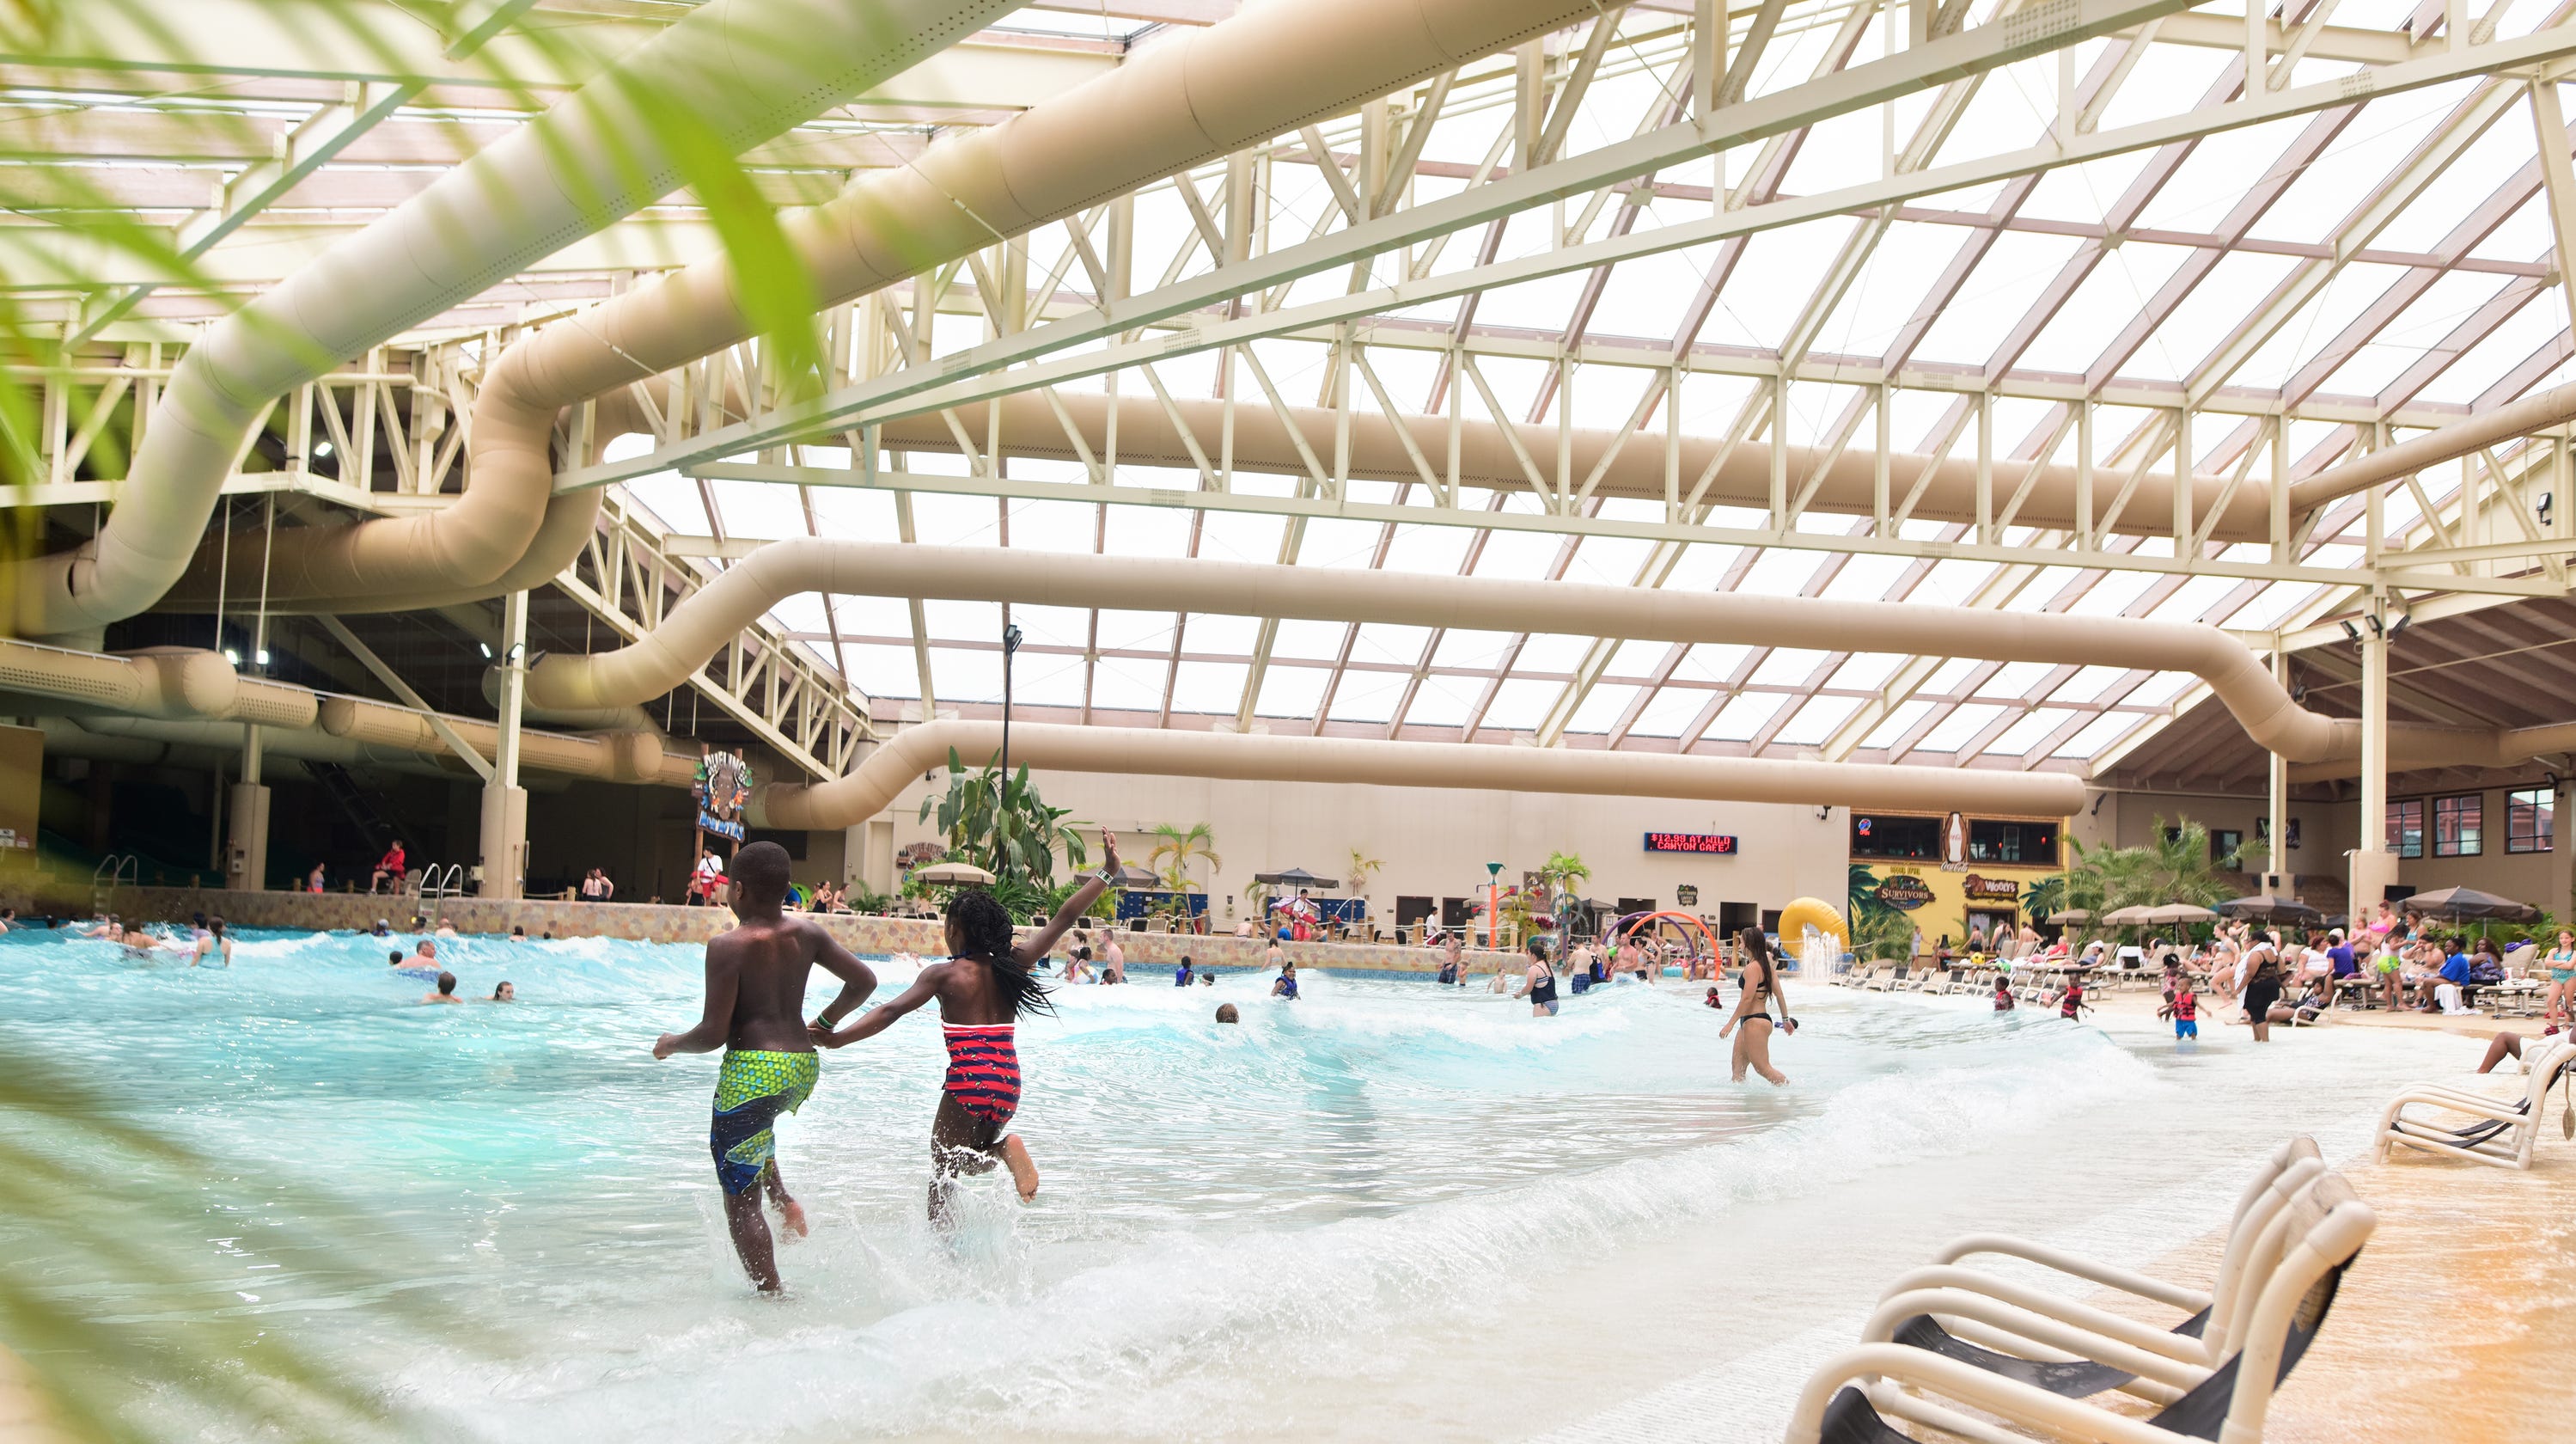 Wisconsin Dells water and amusement parks reopen, starting Saturday